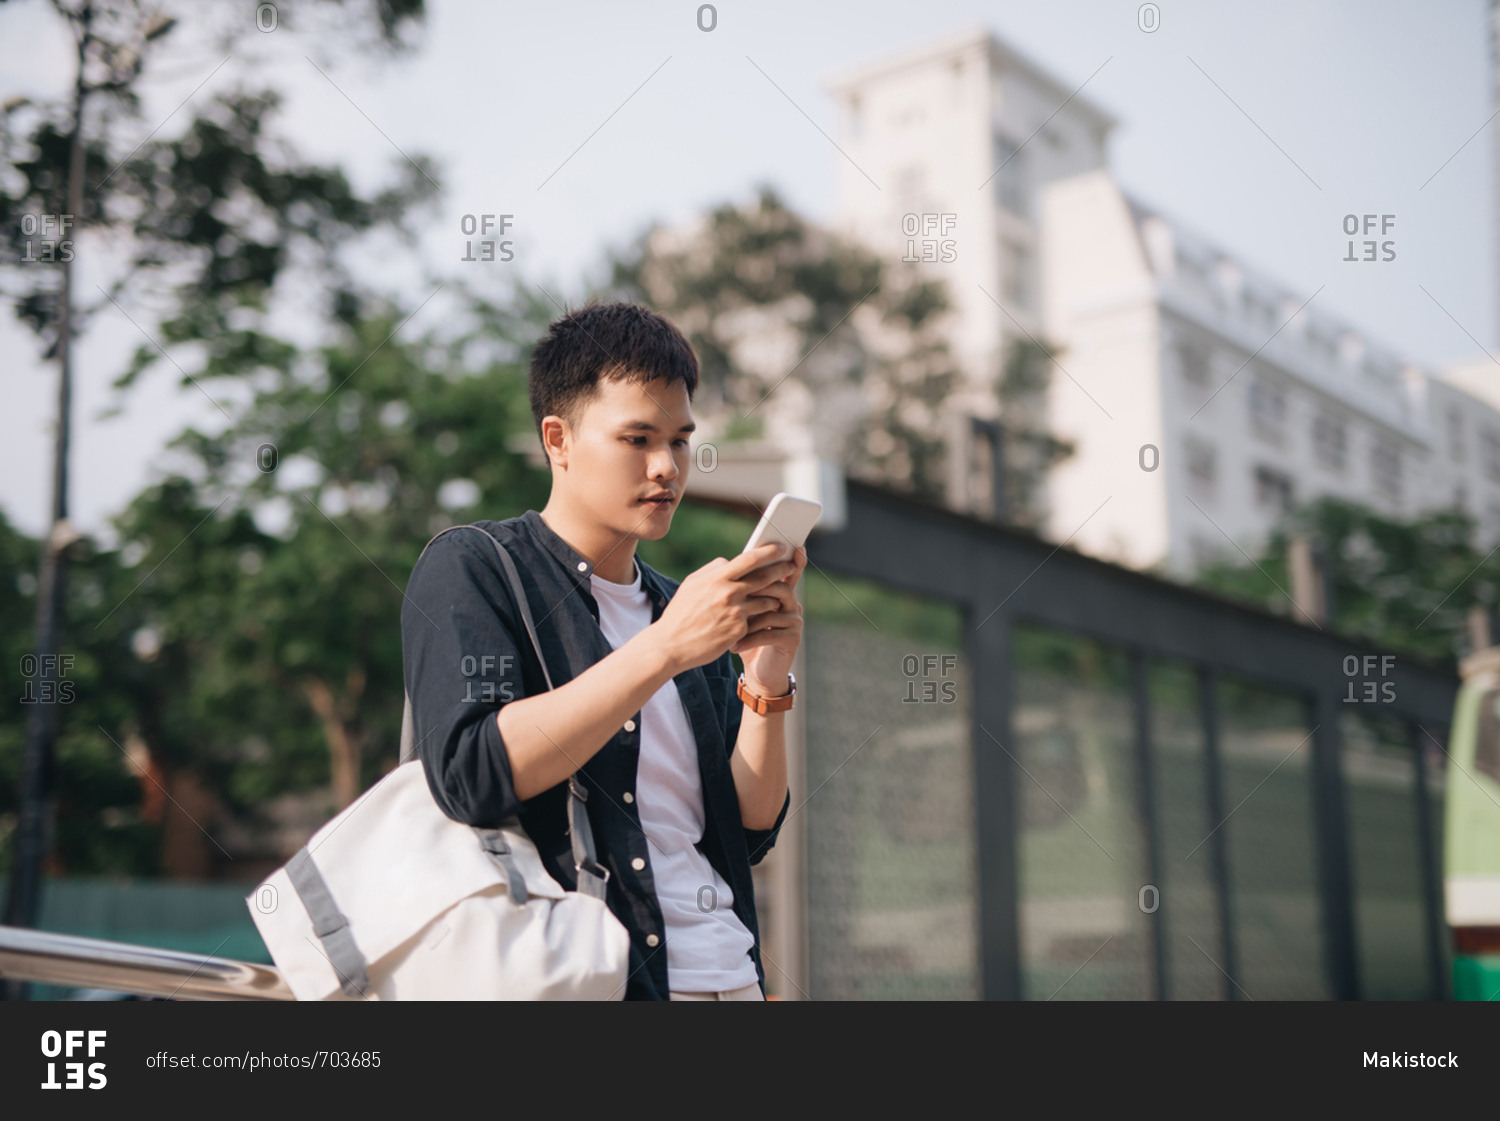 Portrait of asian man texting while waiting for a public bus